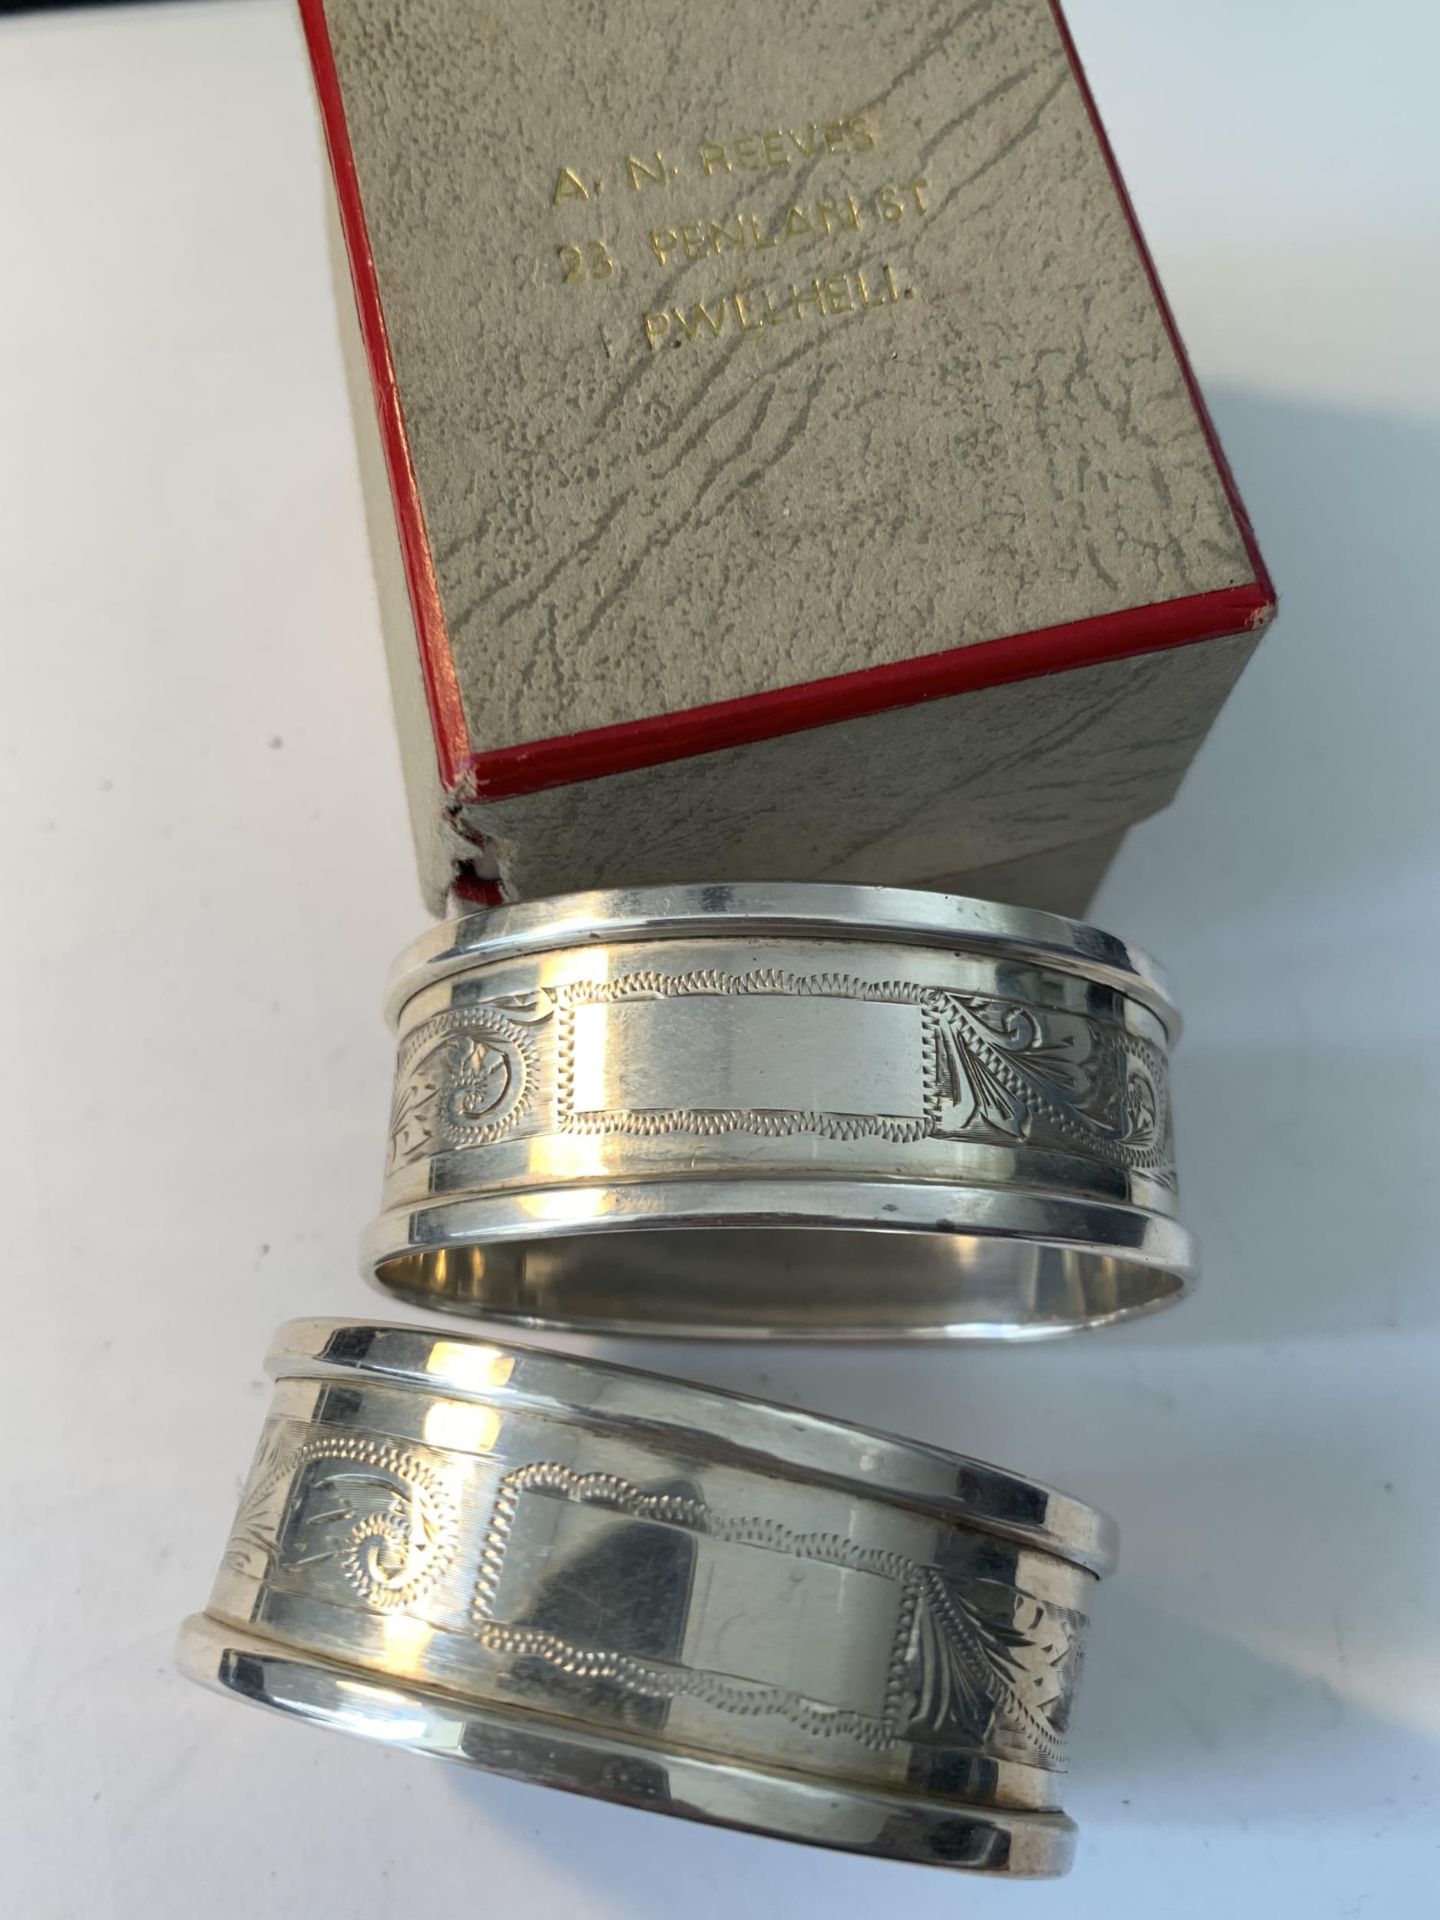 A PAIR OF HALLMARKED BIRMINGHAM SILVER NAPKIN RINGS IN A PRESENTATION BOX - Image 2 of 3